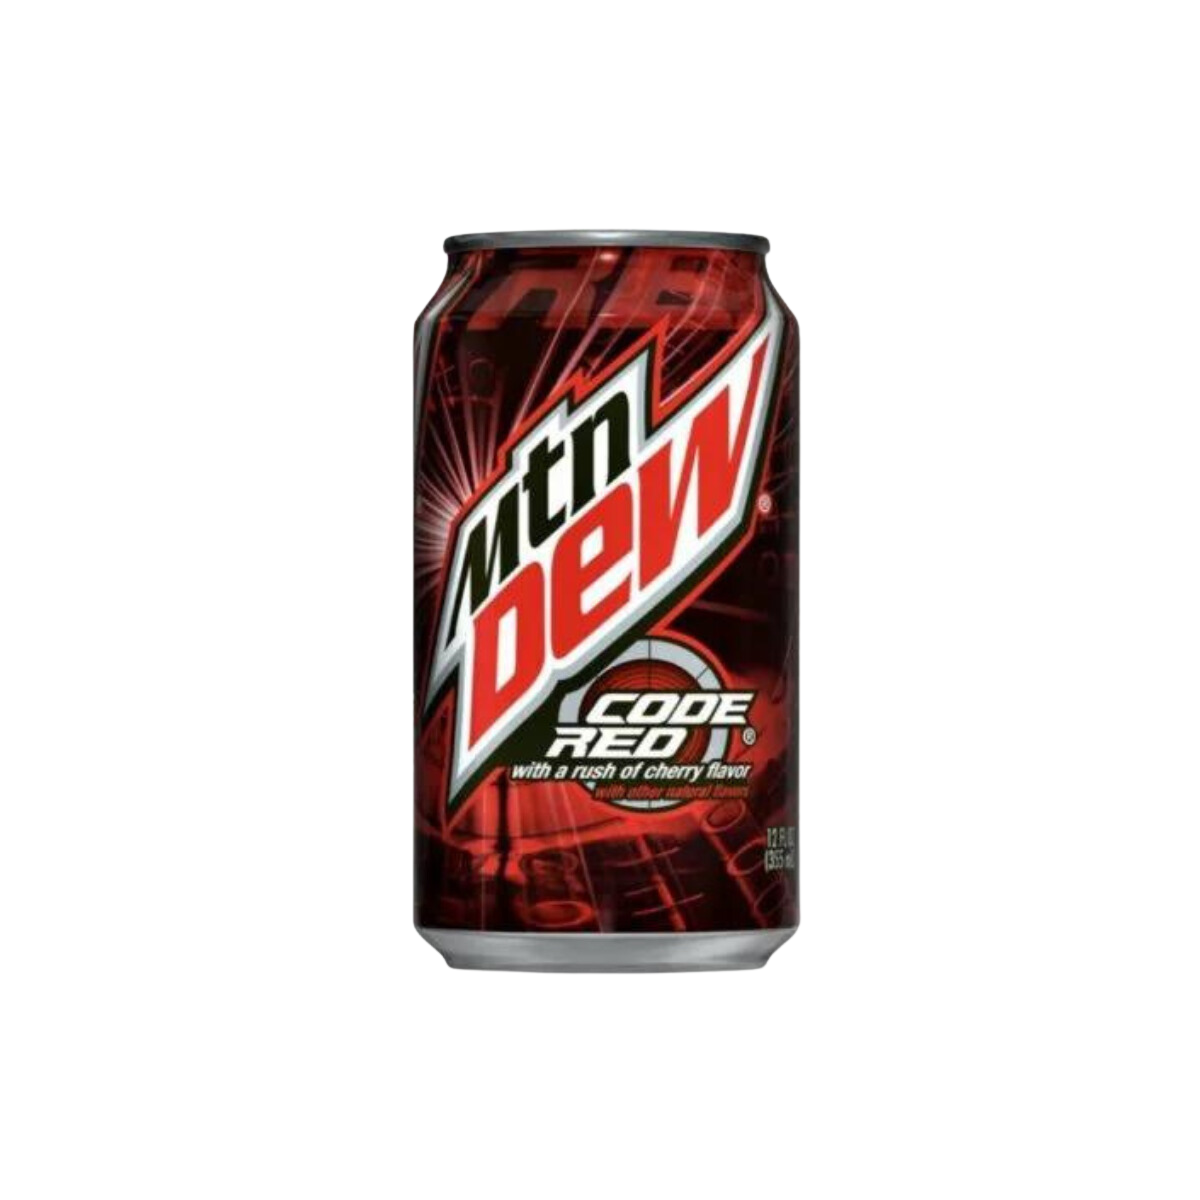 Mountain dew code red